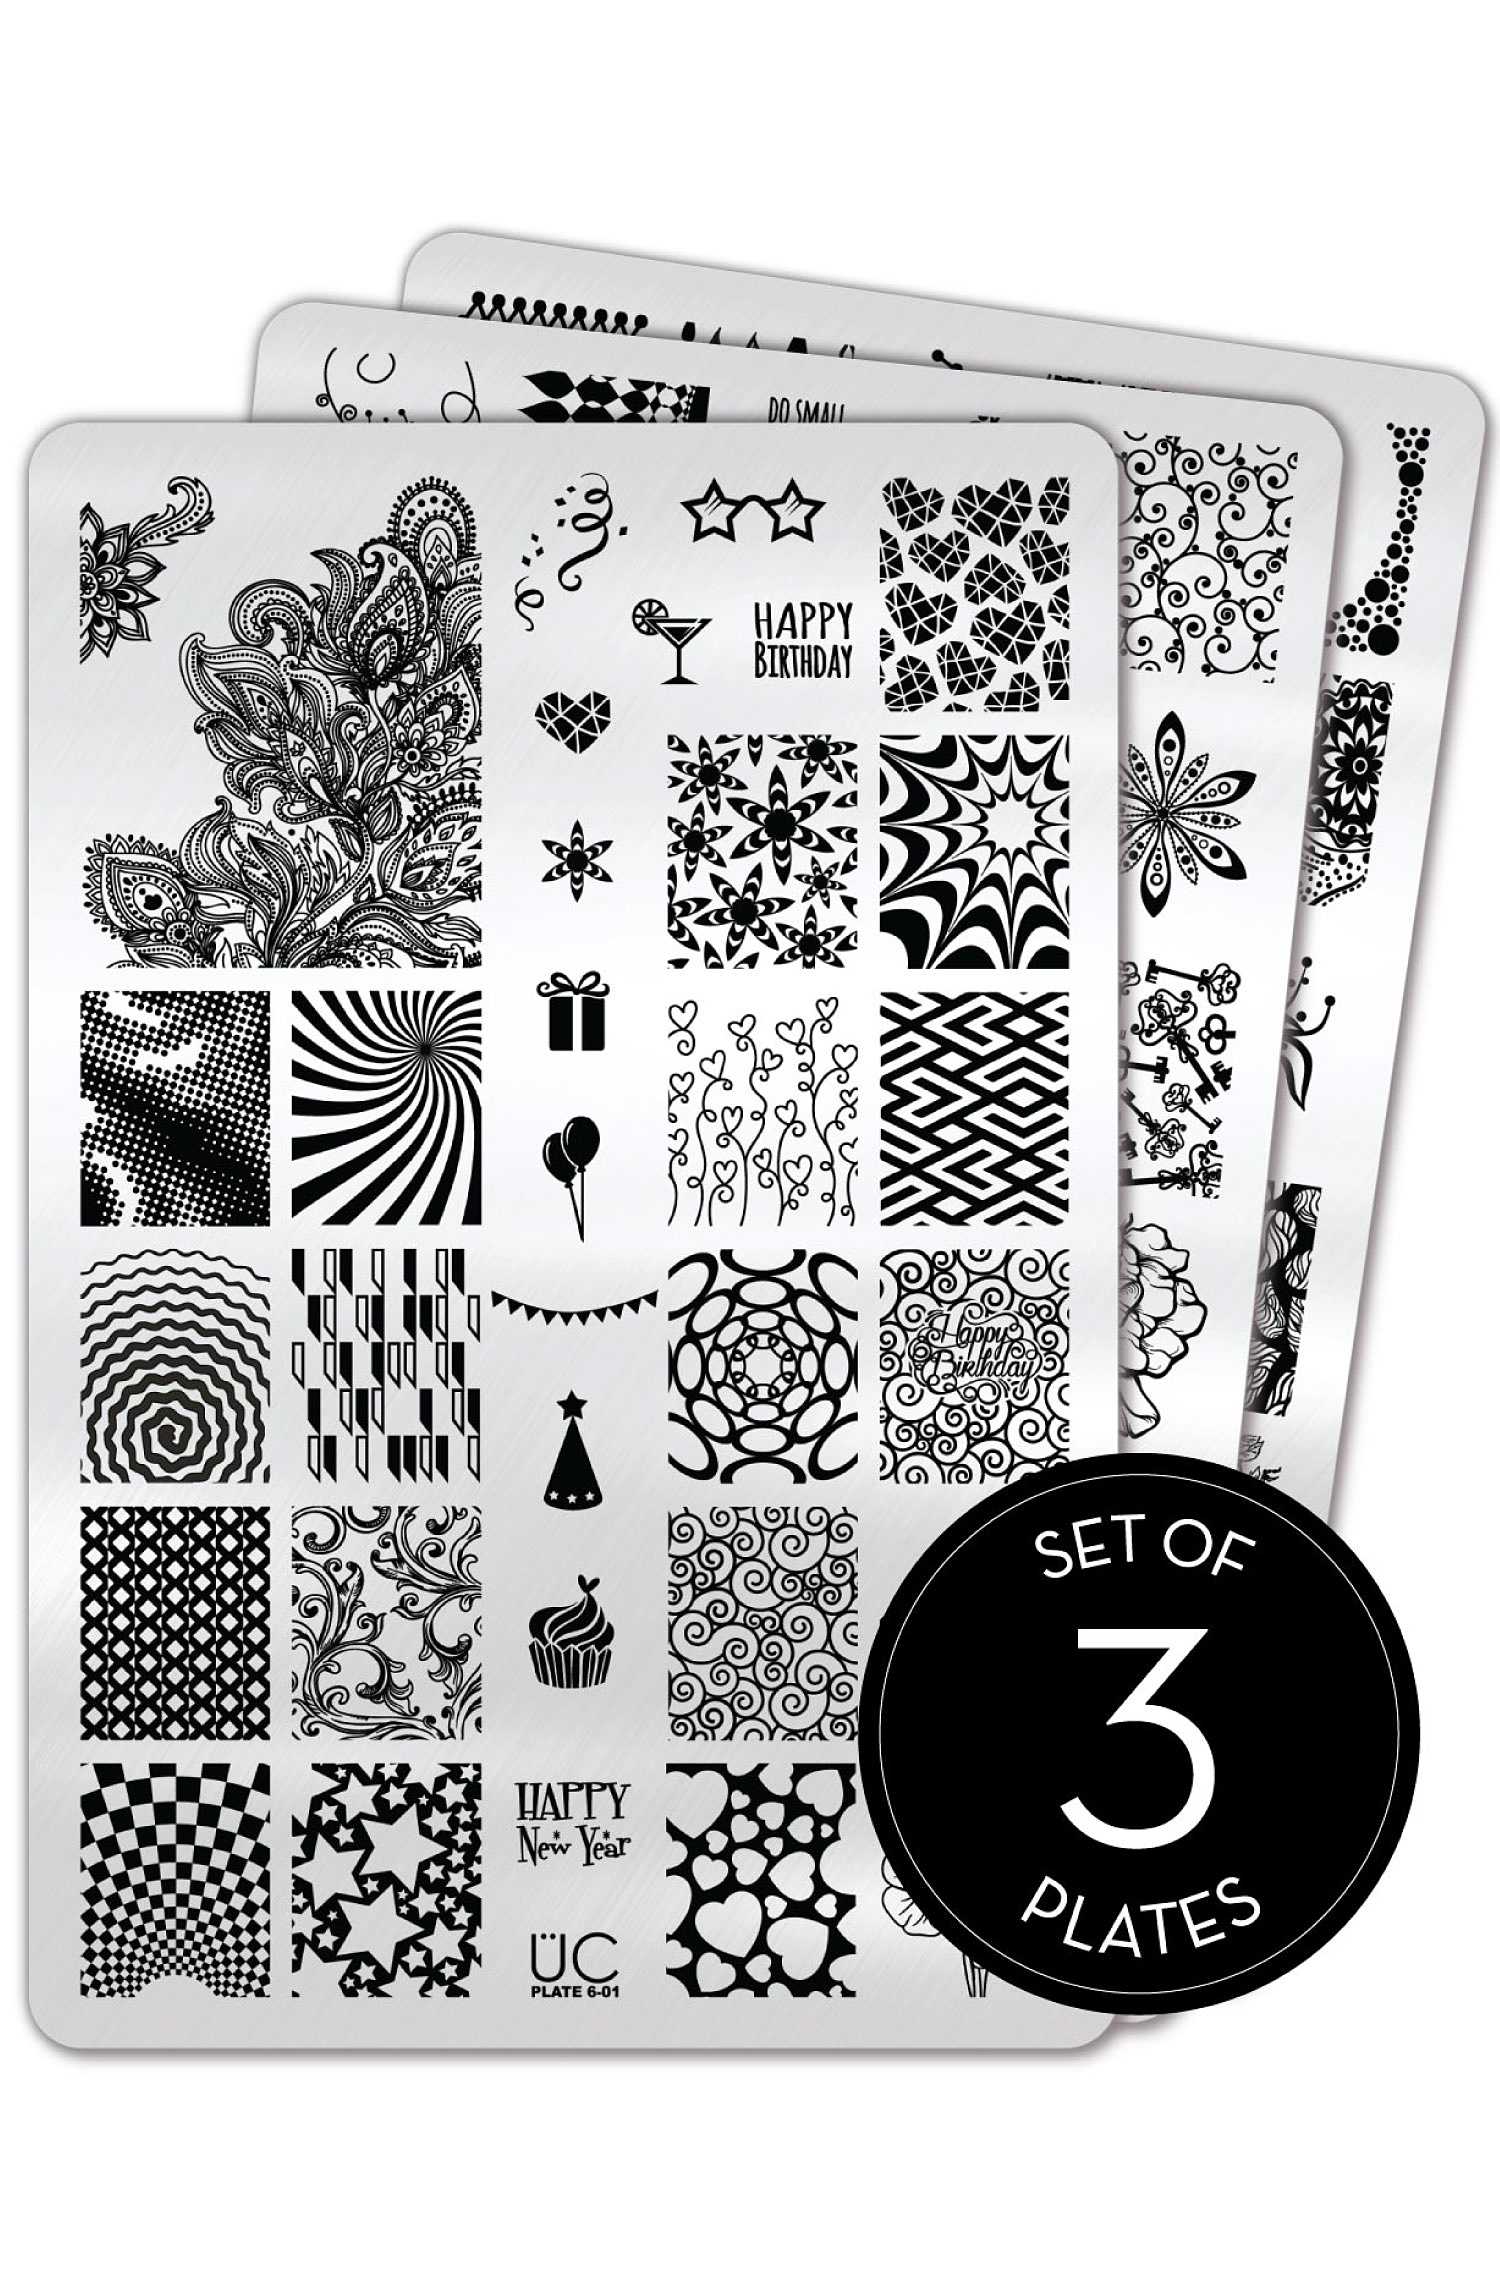 Collection 13 - UberChic Nail Stamping Plates - Includes 3 Unique Nail  Stamp Plates – UberChic Beauty